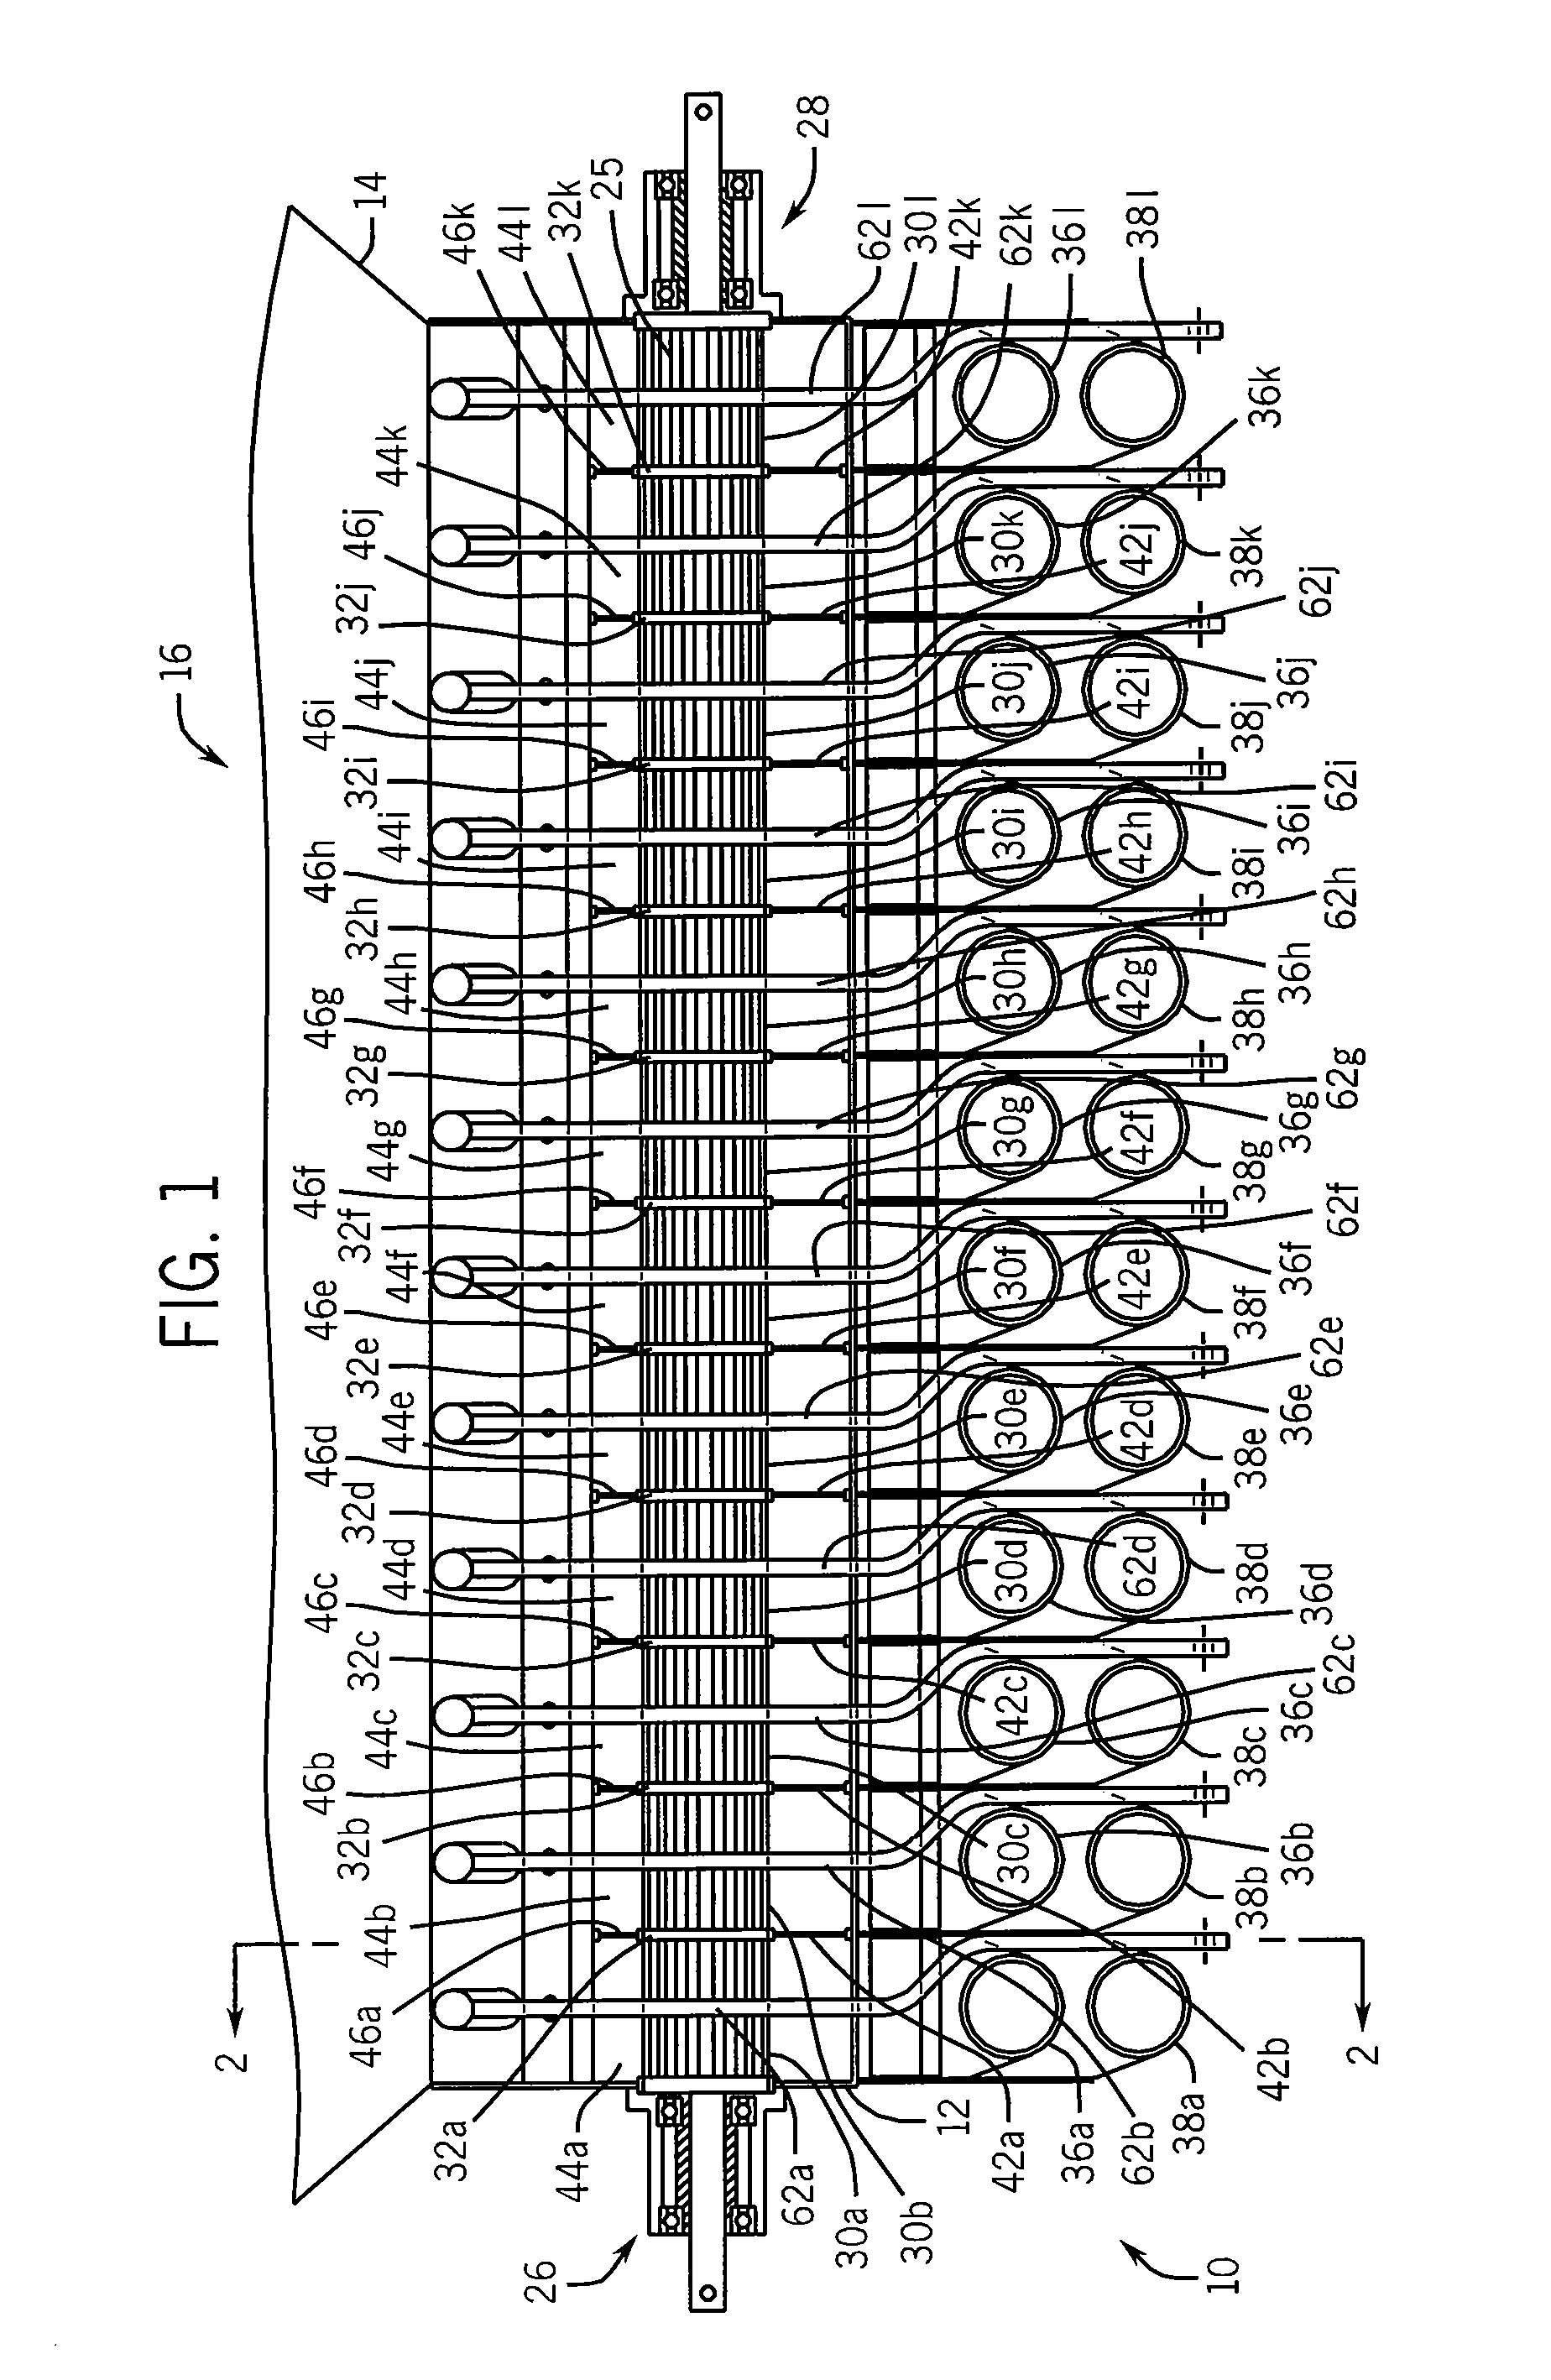 Seed Metering Assembly For Farm Implement And Having Quick-Change Capability And Sectional Control